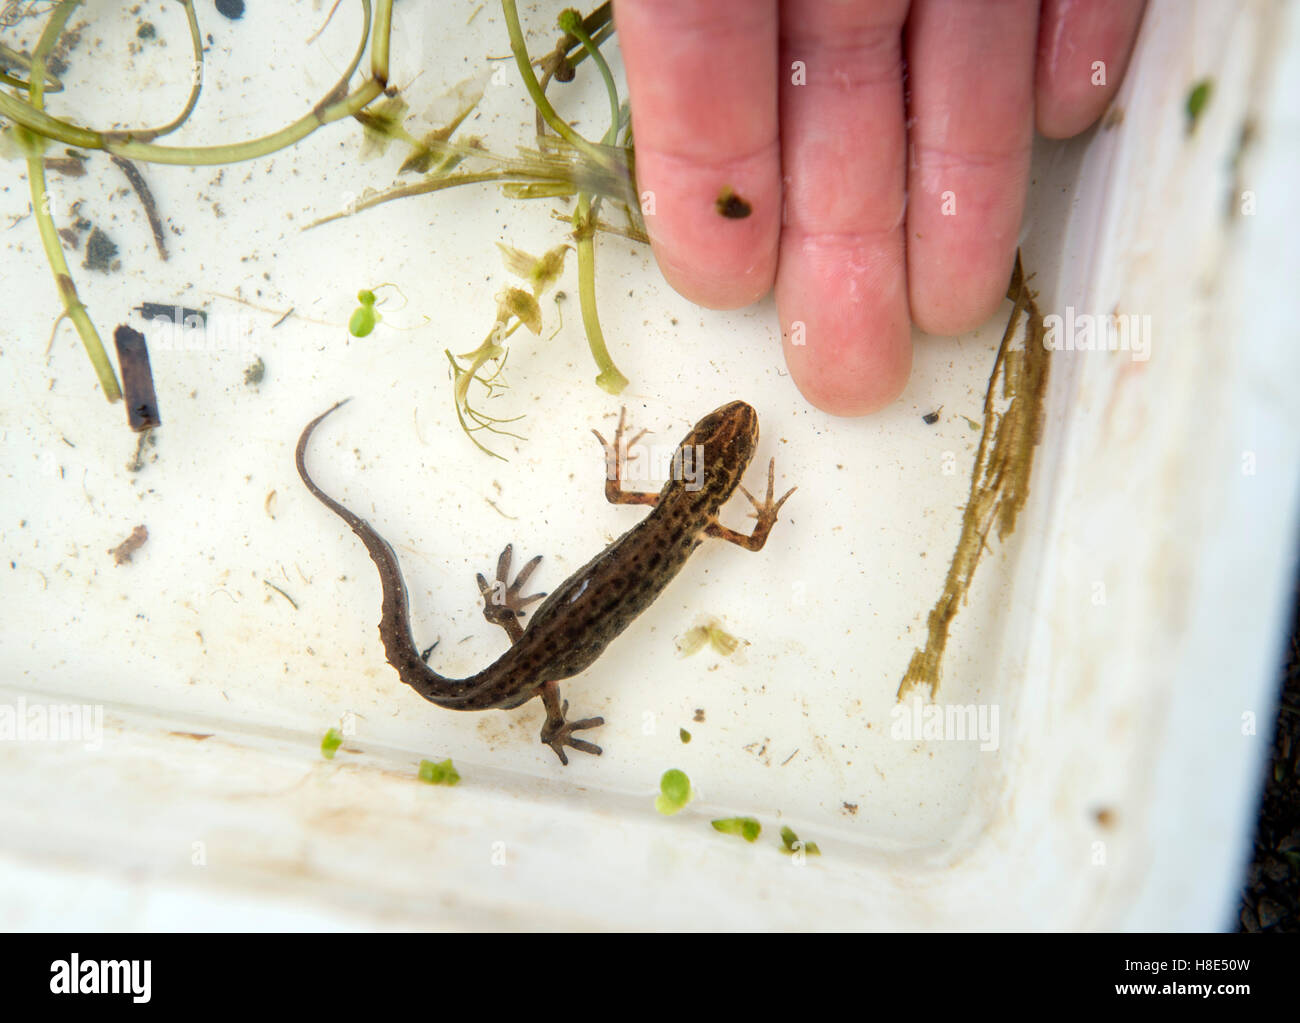 A Smooth Newt caught by children pond dipping at the Golden Hill Community Garden in Bristol, UK Stock Photo